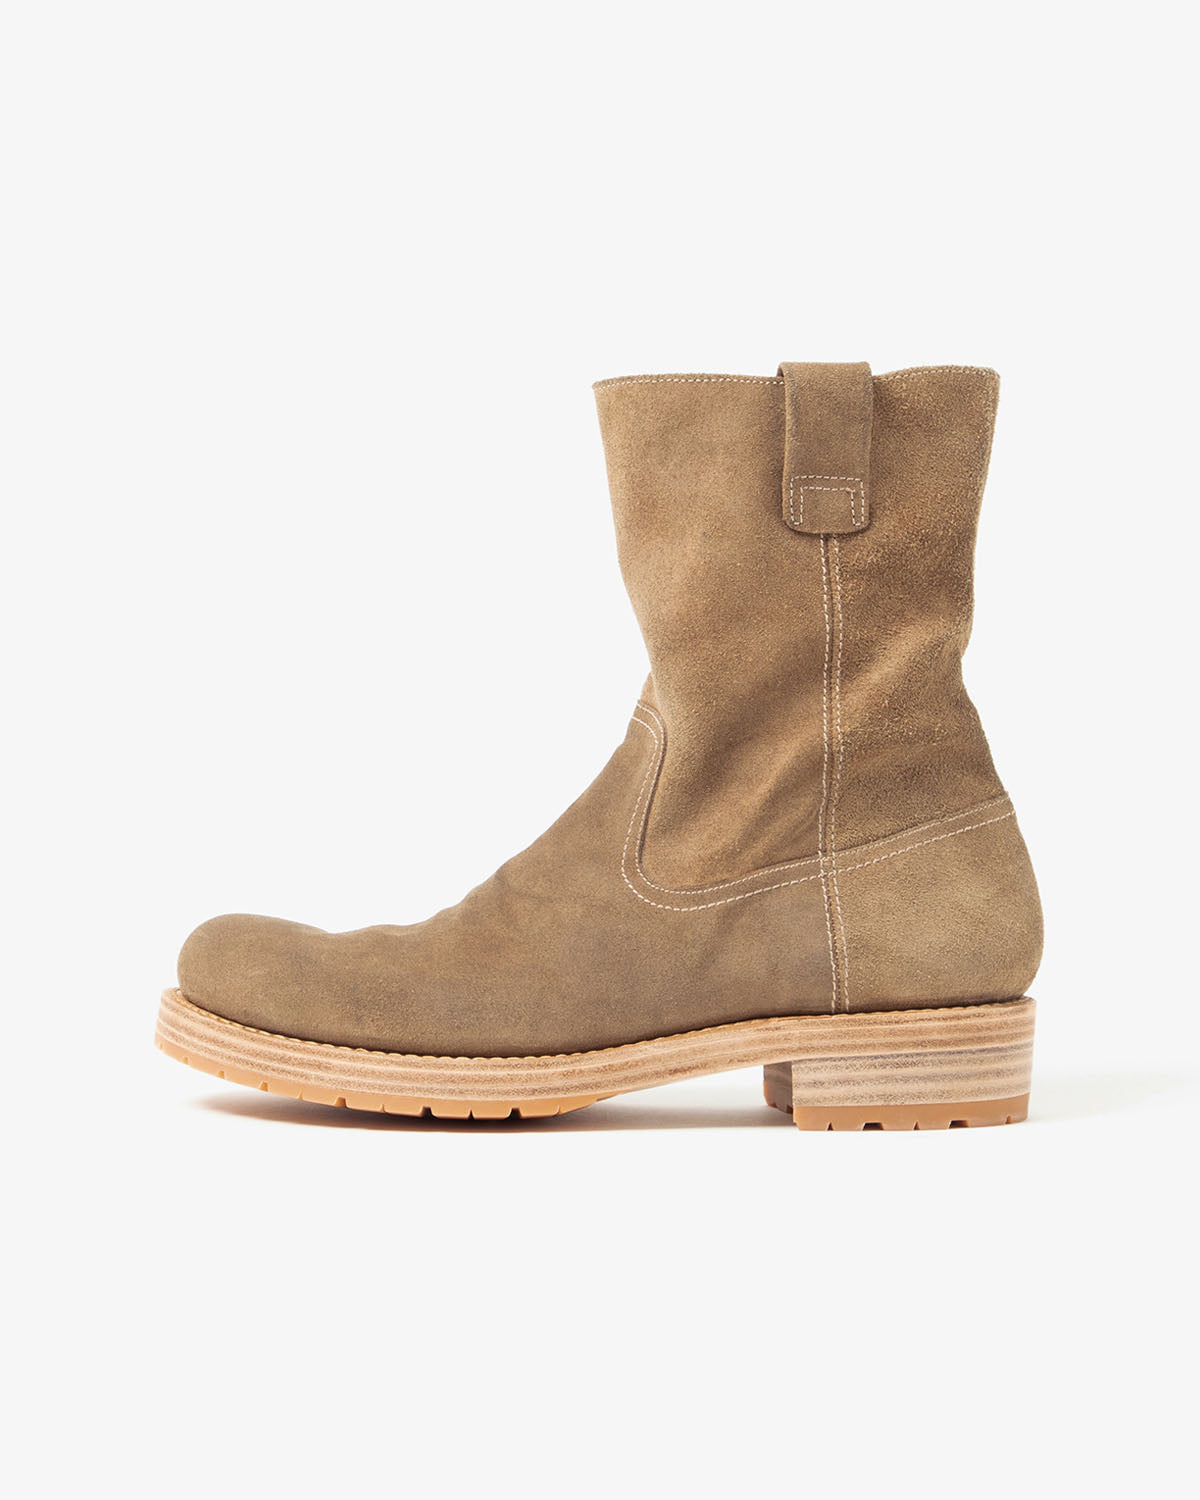 nonnative　Dweler　zipup　boots　cow　suedeアウトソール295㎝